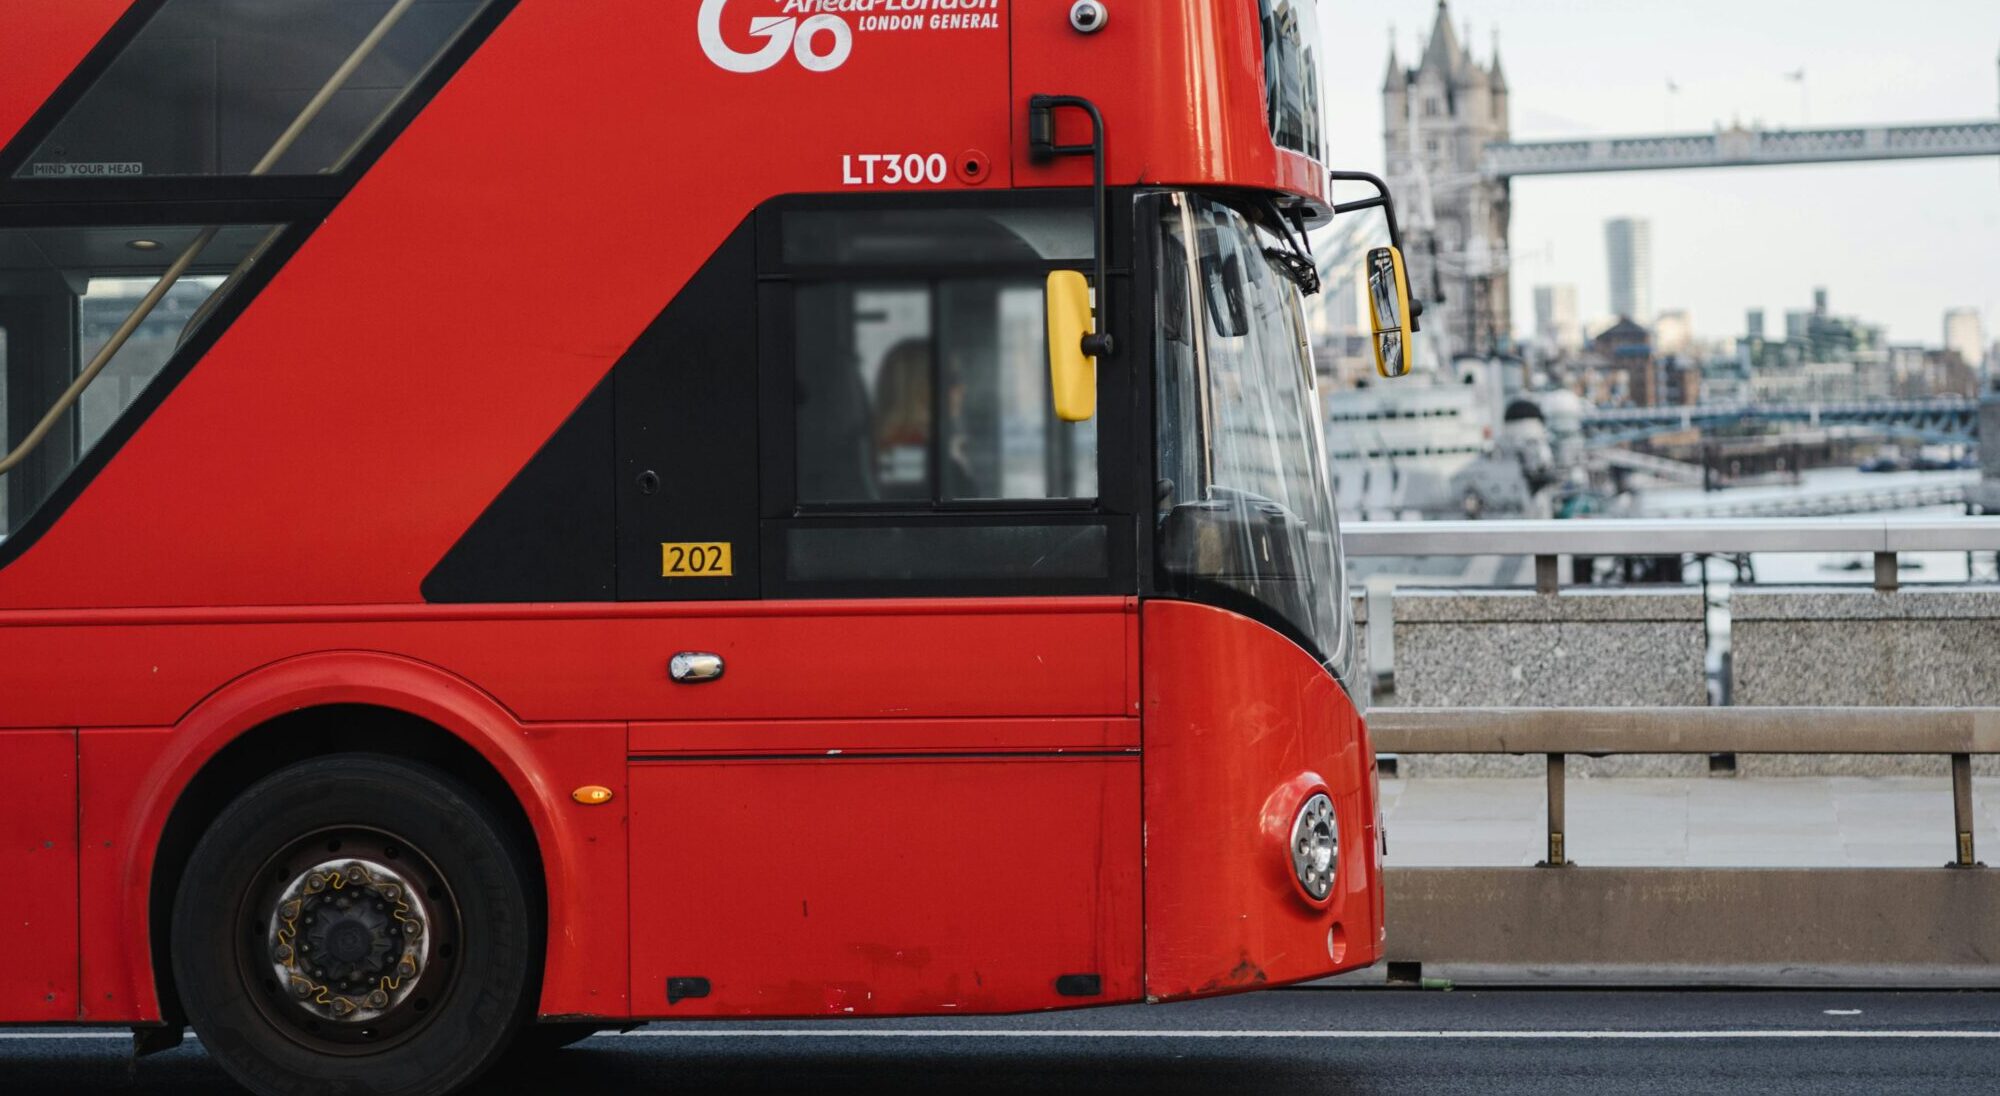 image of a red bus in London